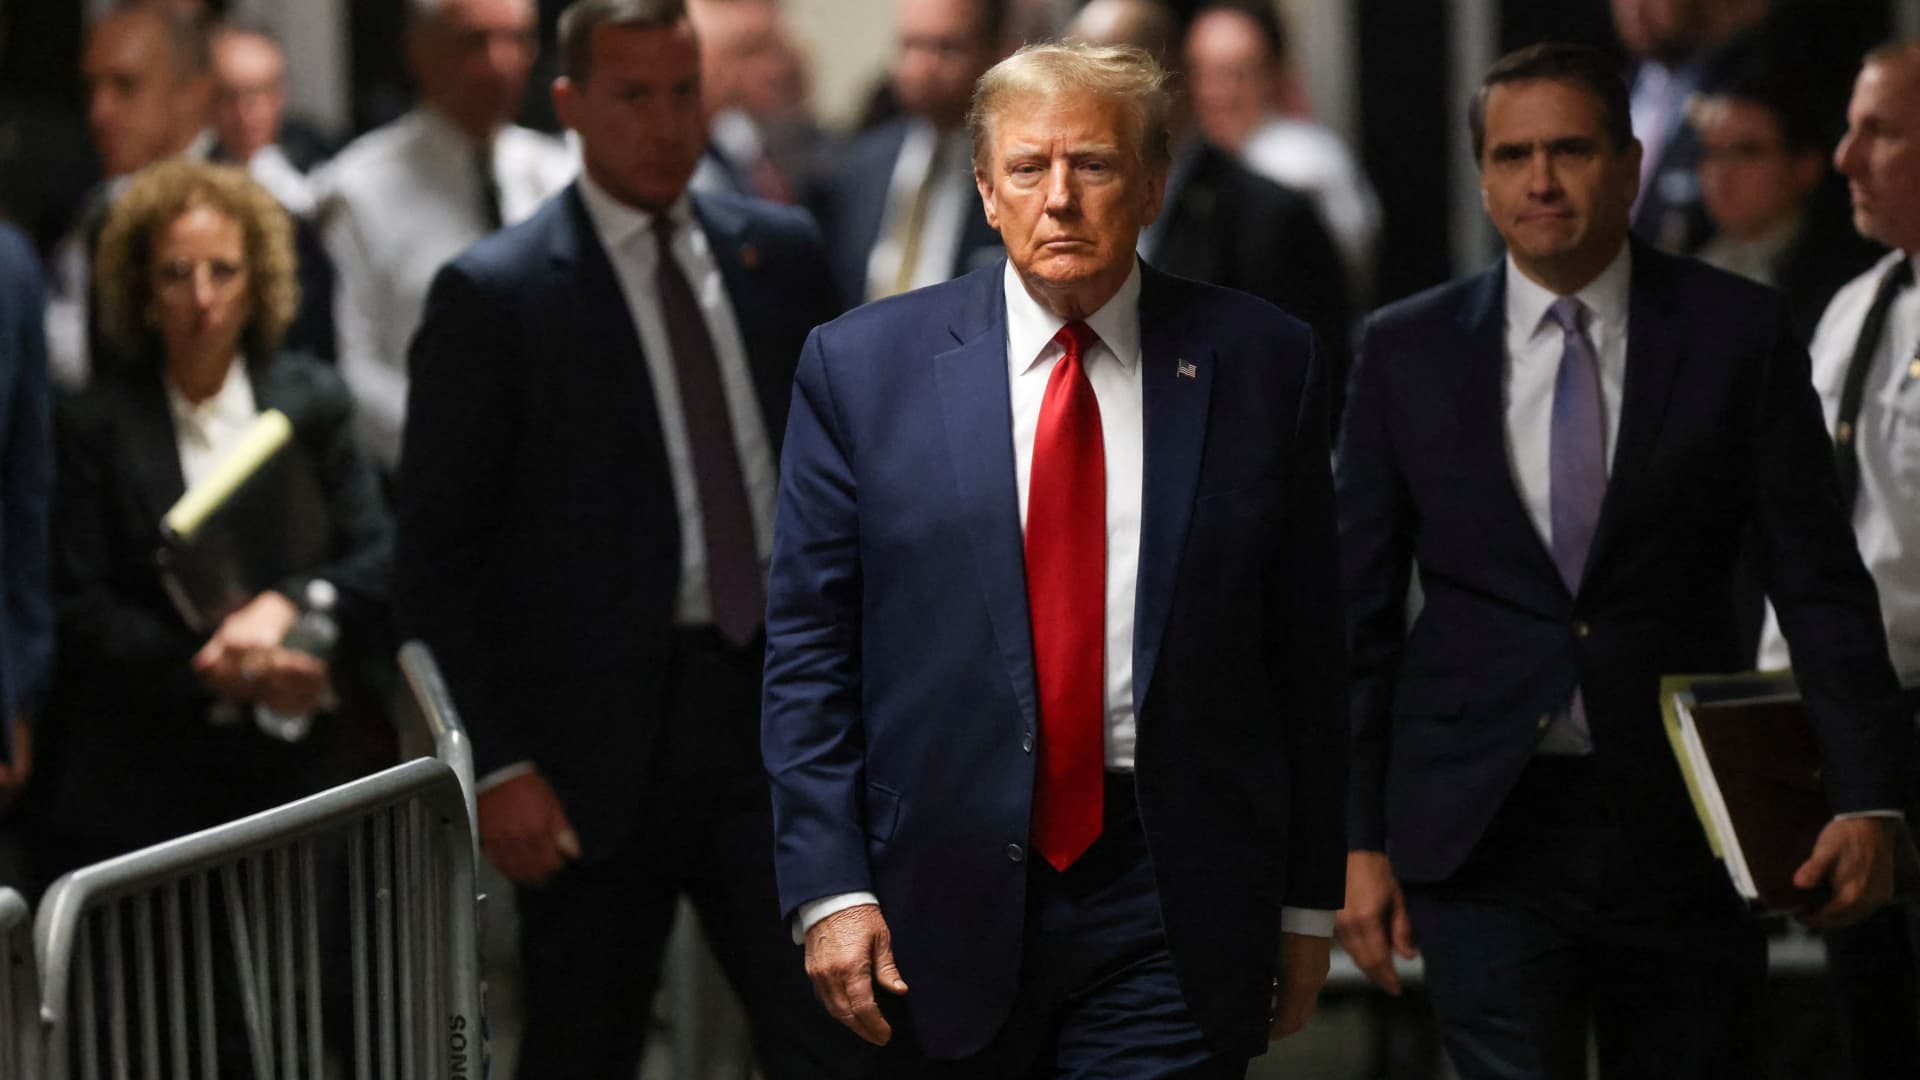 Former U.S. President Donald Trump walks outside the courtroom on the day of a court hearing on charges of falsifying business records to cover up a hush money payment to a porn star before the 2016 election, in New York State Supreme Court in the Manhattan borough of New York City, U.S., February 15, 2024.